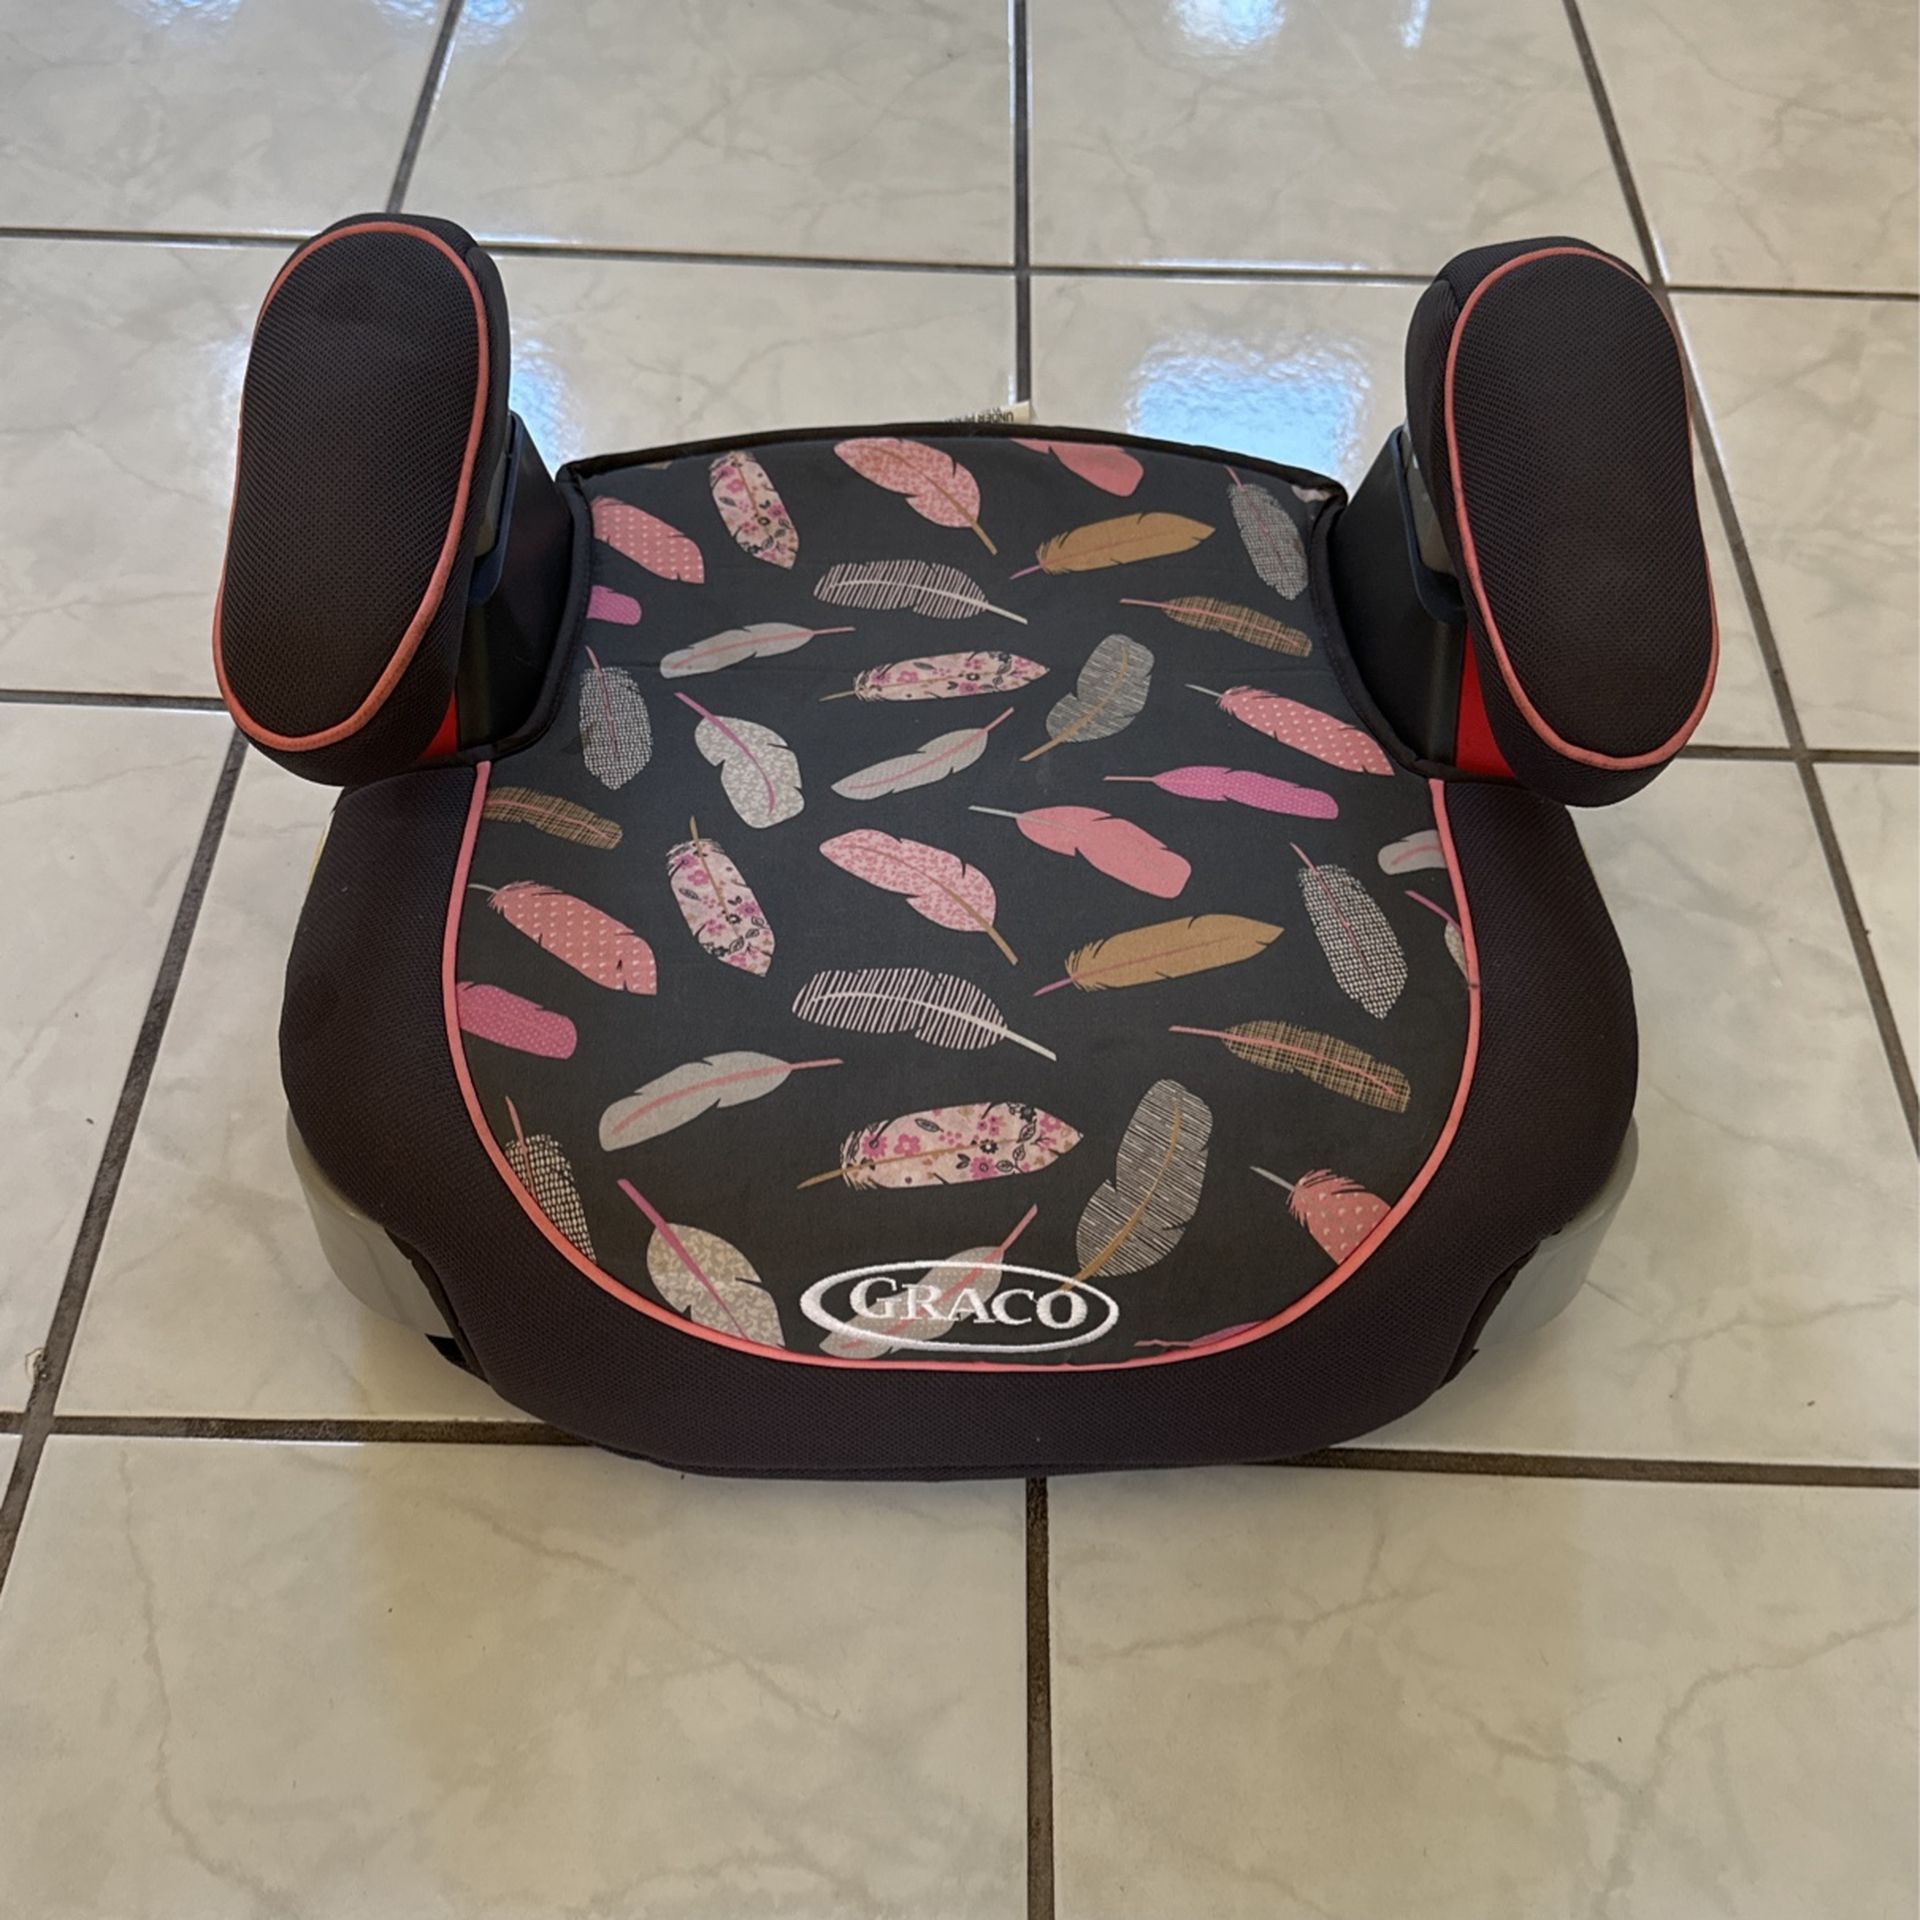 Booster Seat Car Seat Graco